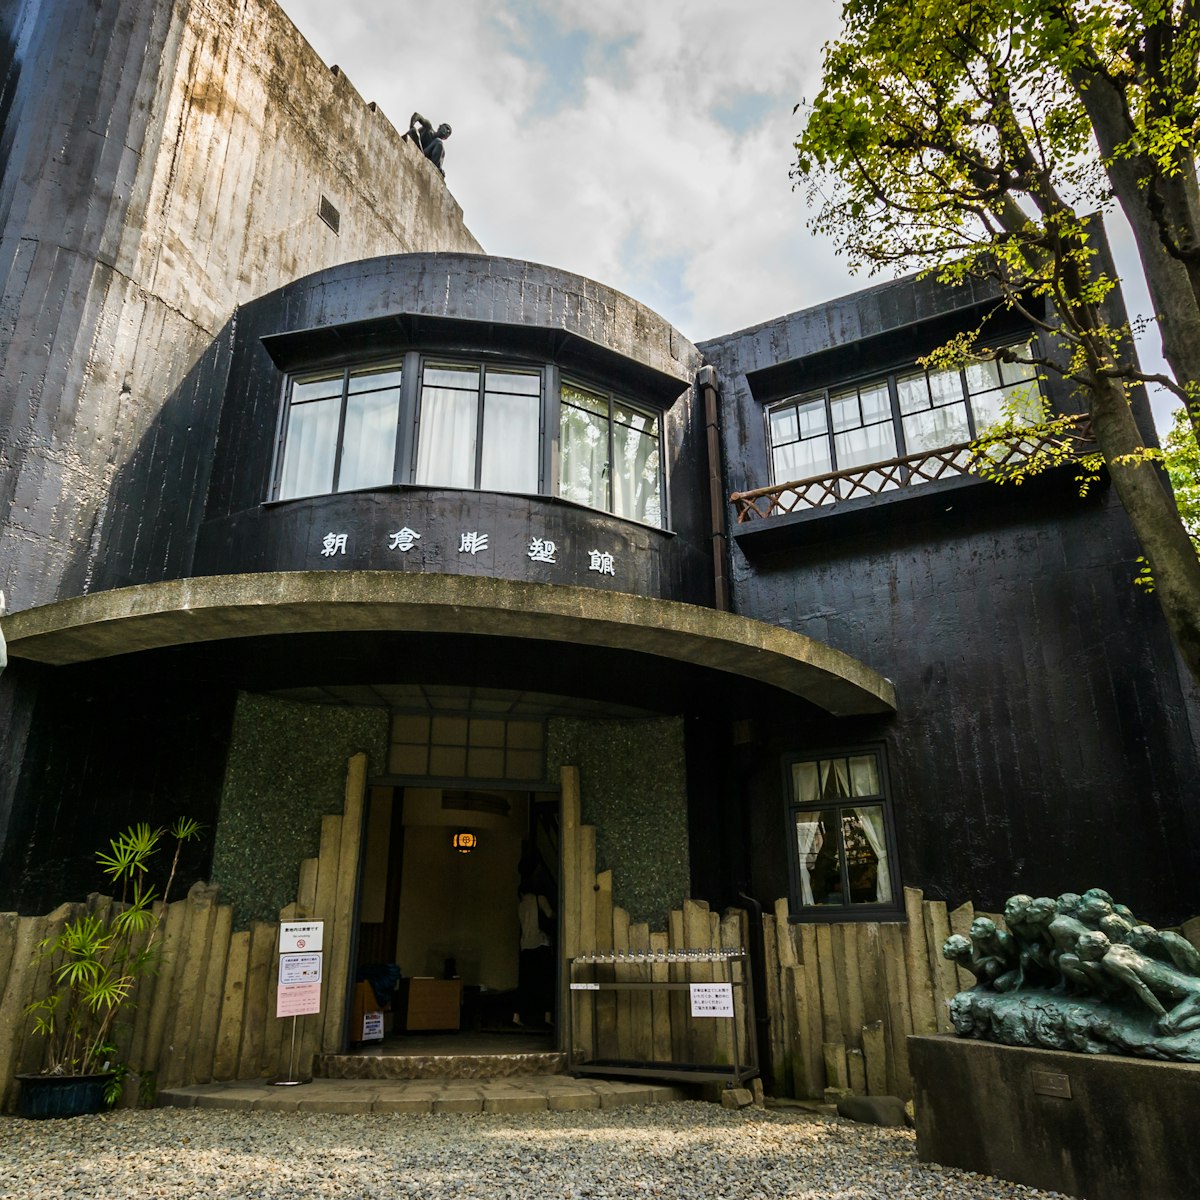 Exterior of the 'Asakura Choso Museum' (Museum of Sculpture) in Yanaka, Tokyo.  This was the home and studio of sculptor Fumio Asakura and now exhibits his work.
648163650